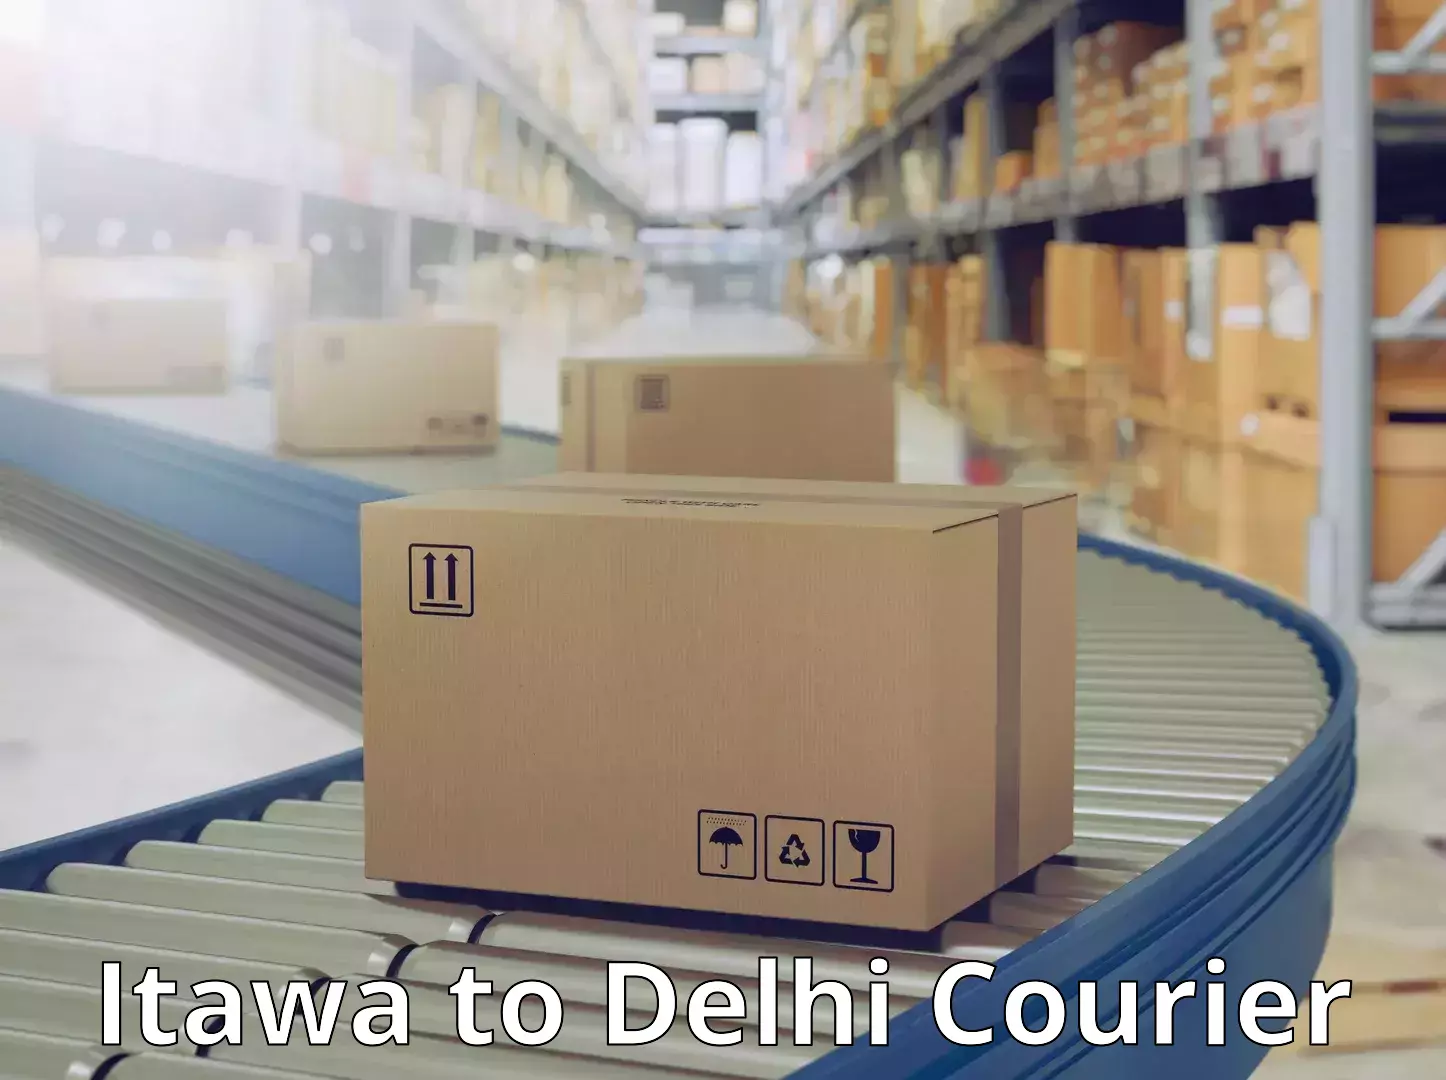 Express package delivery Itawa to Delhi